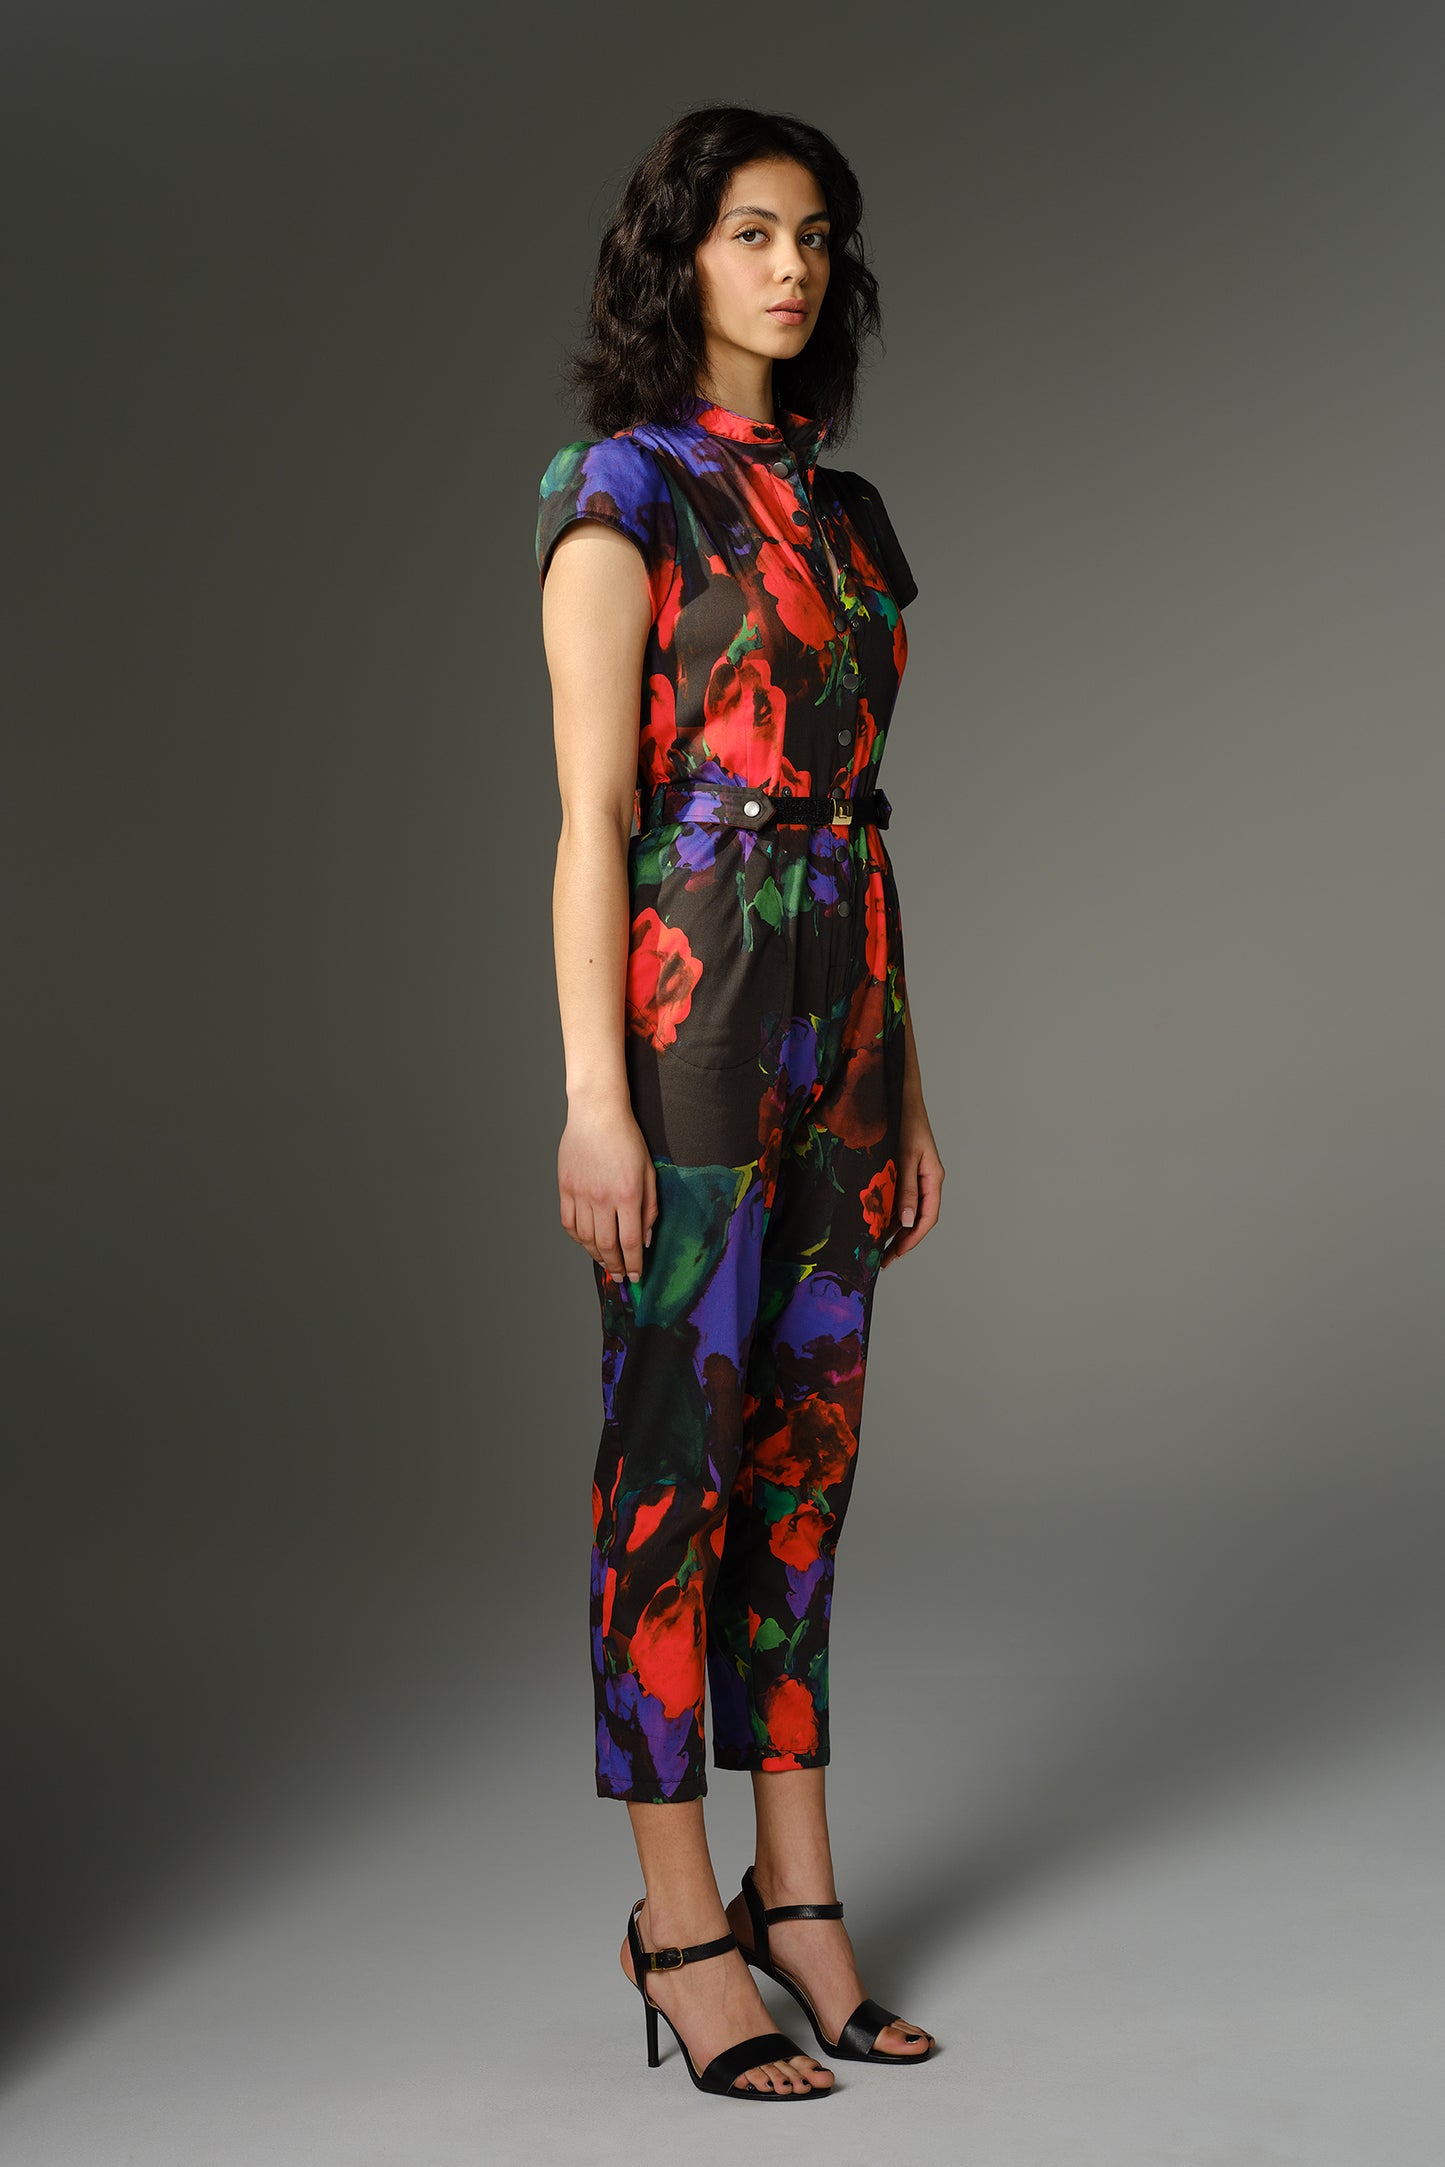 THE WOOLF Jumpsuit - Short Sleeve in Printed Floral Cotton Sateen